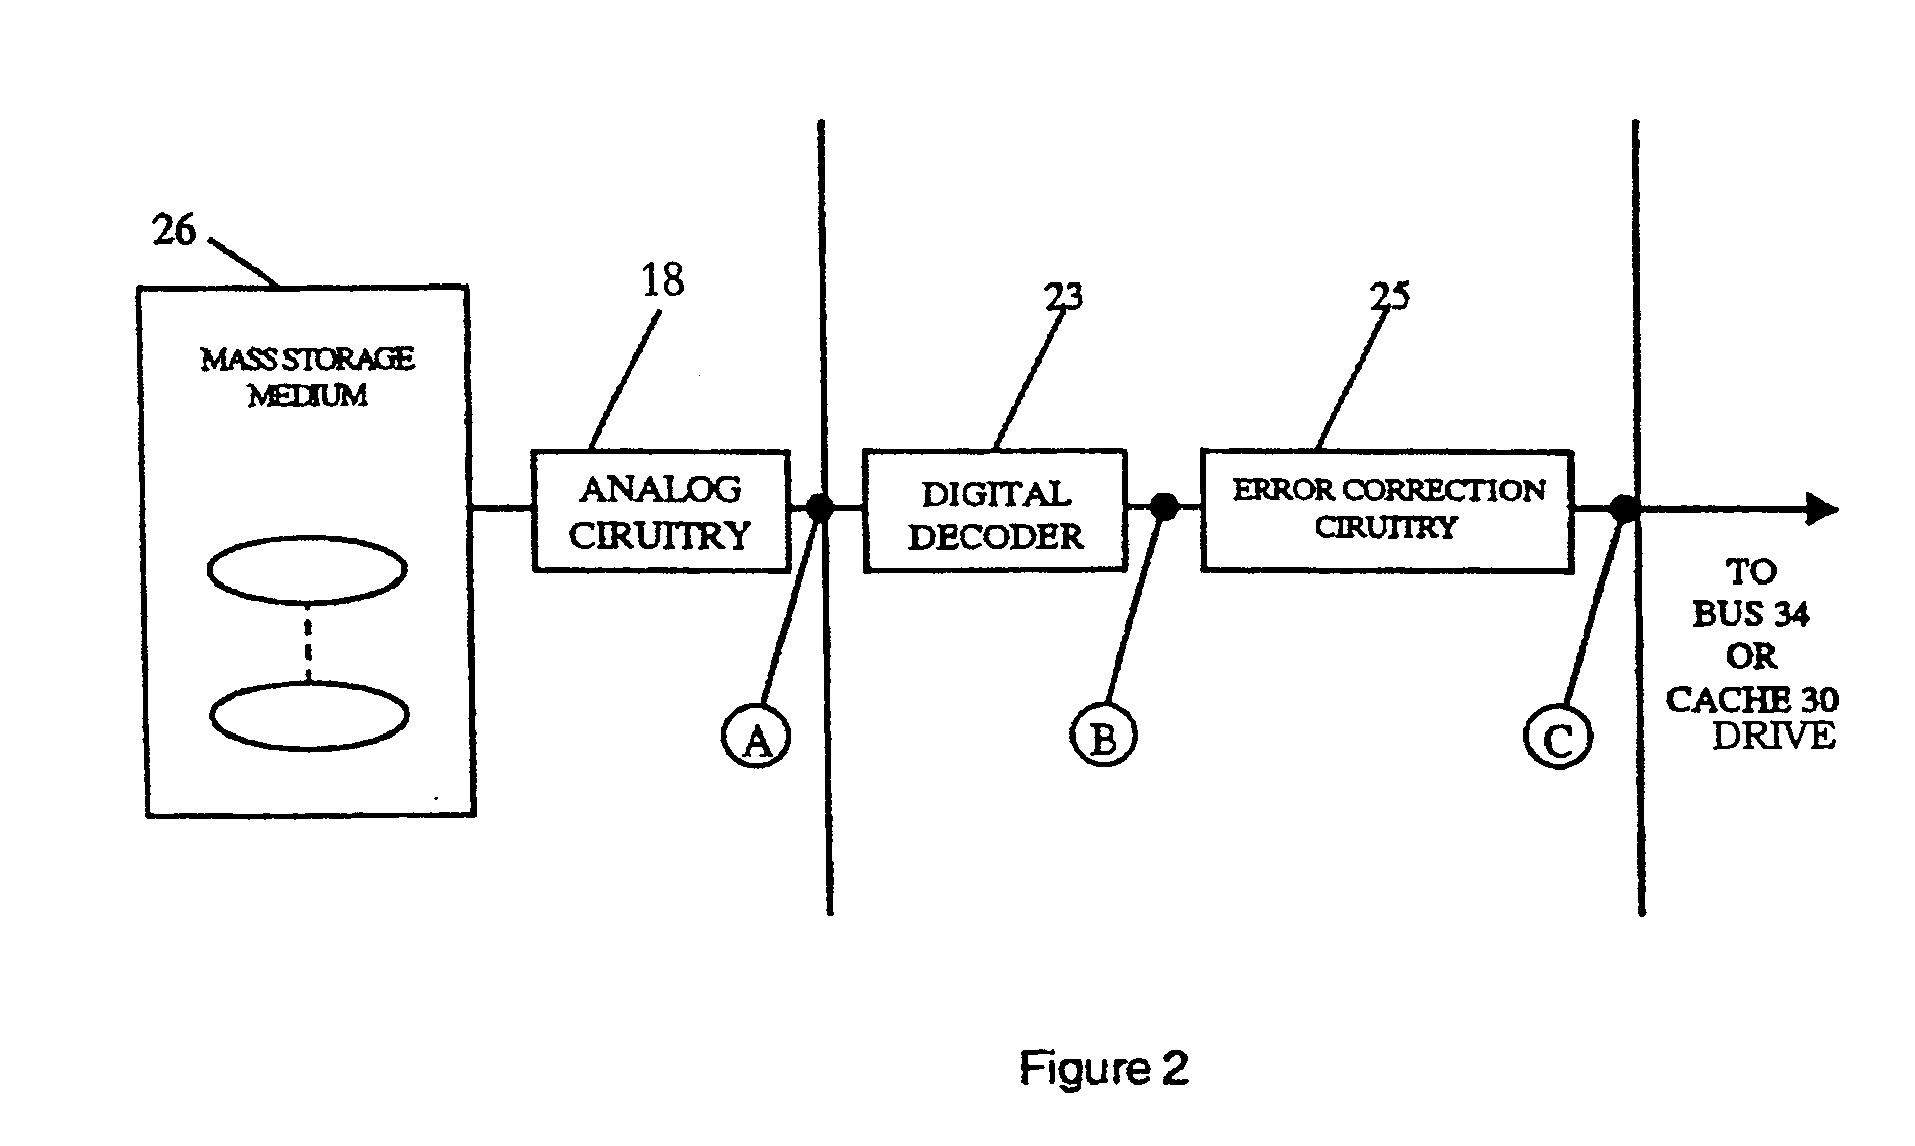 Method and Apparatus for Processing Financial Information at Hardware Speeds Using FPGA Devices